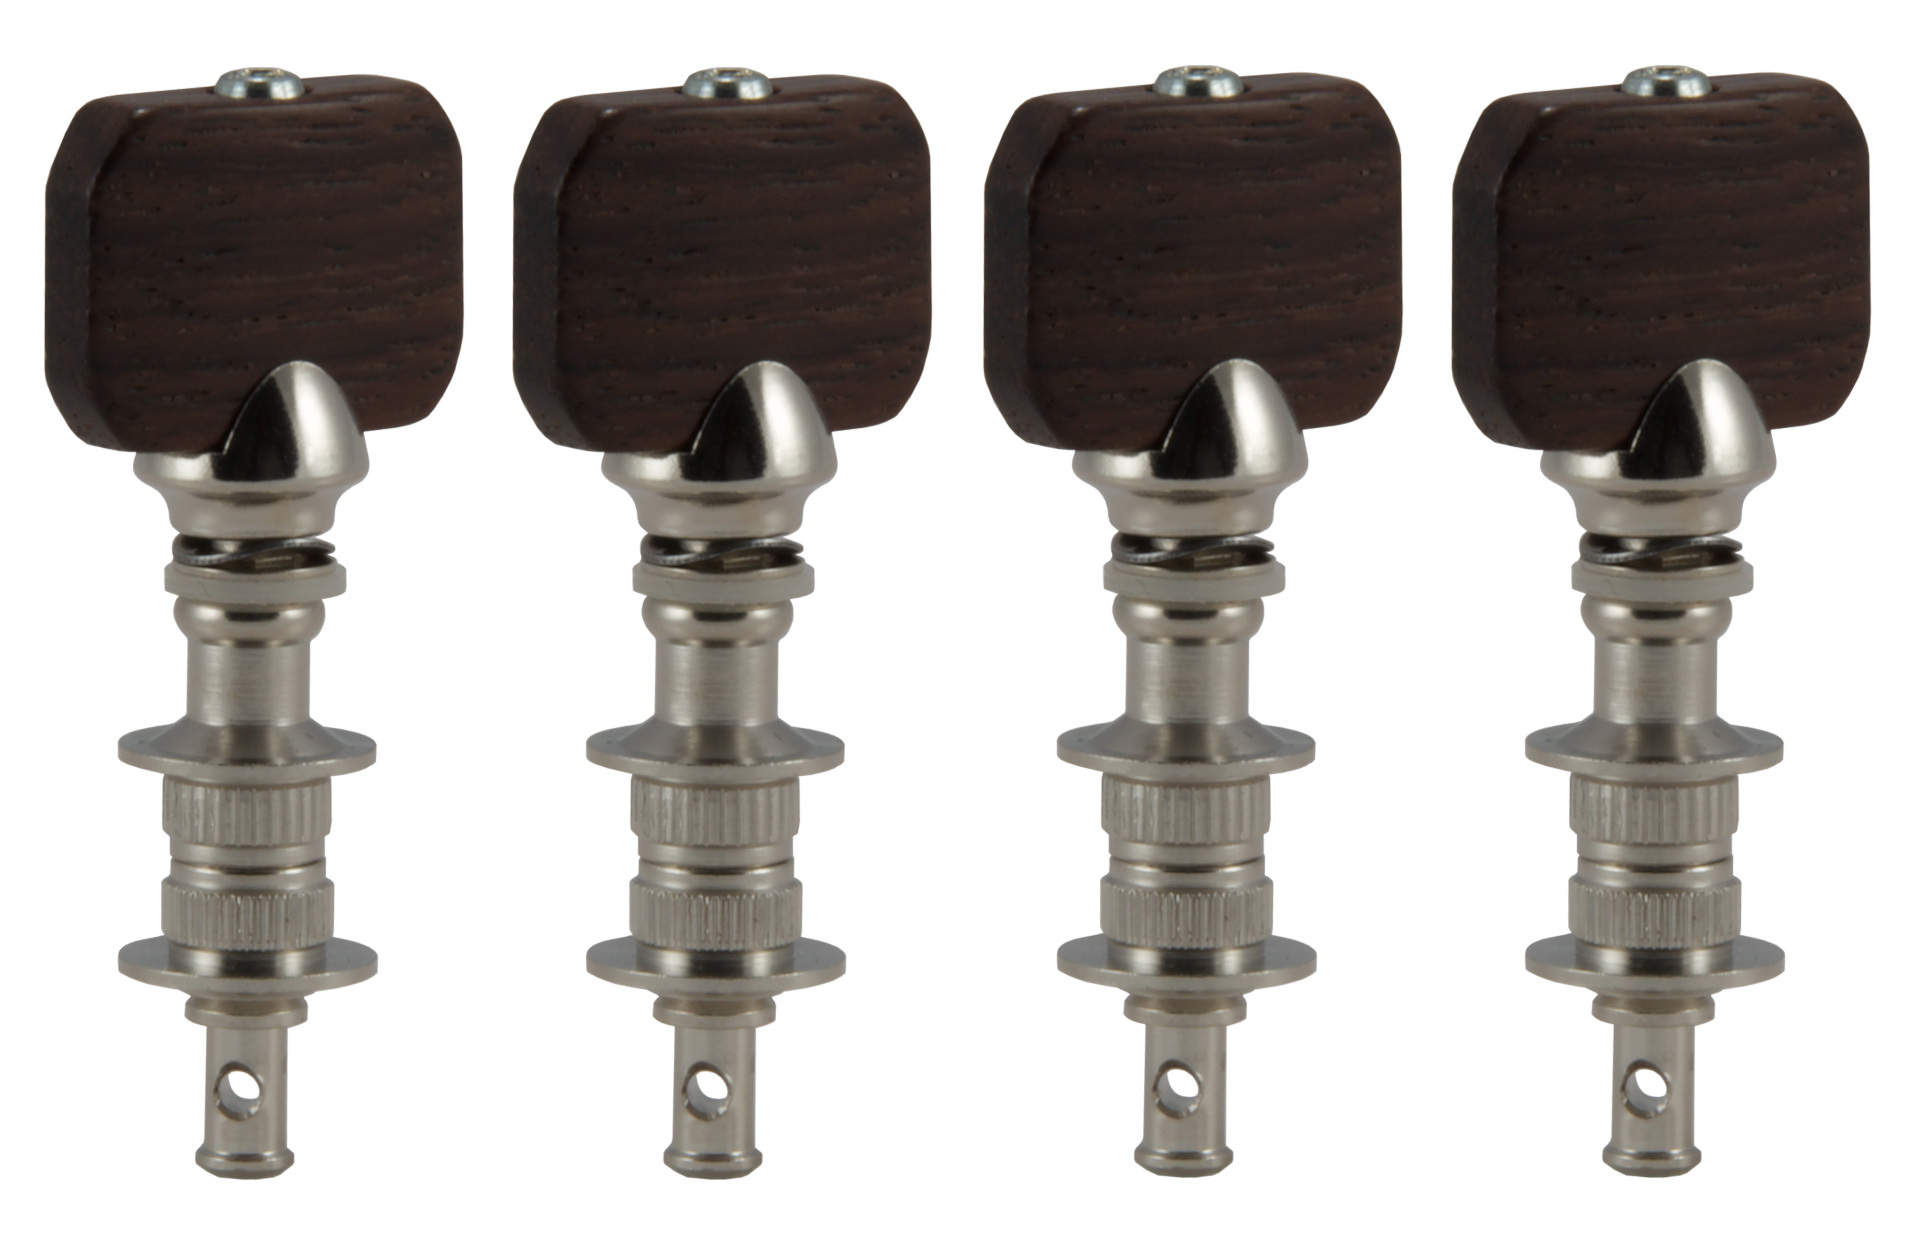 Grover 870BR Sta-Tite Dulcimer Pegs with Rosewood Button - 4 pcs. - Nickel